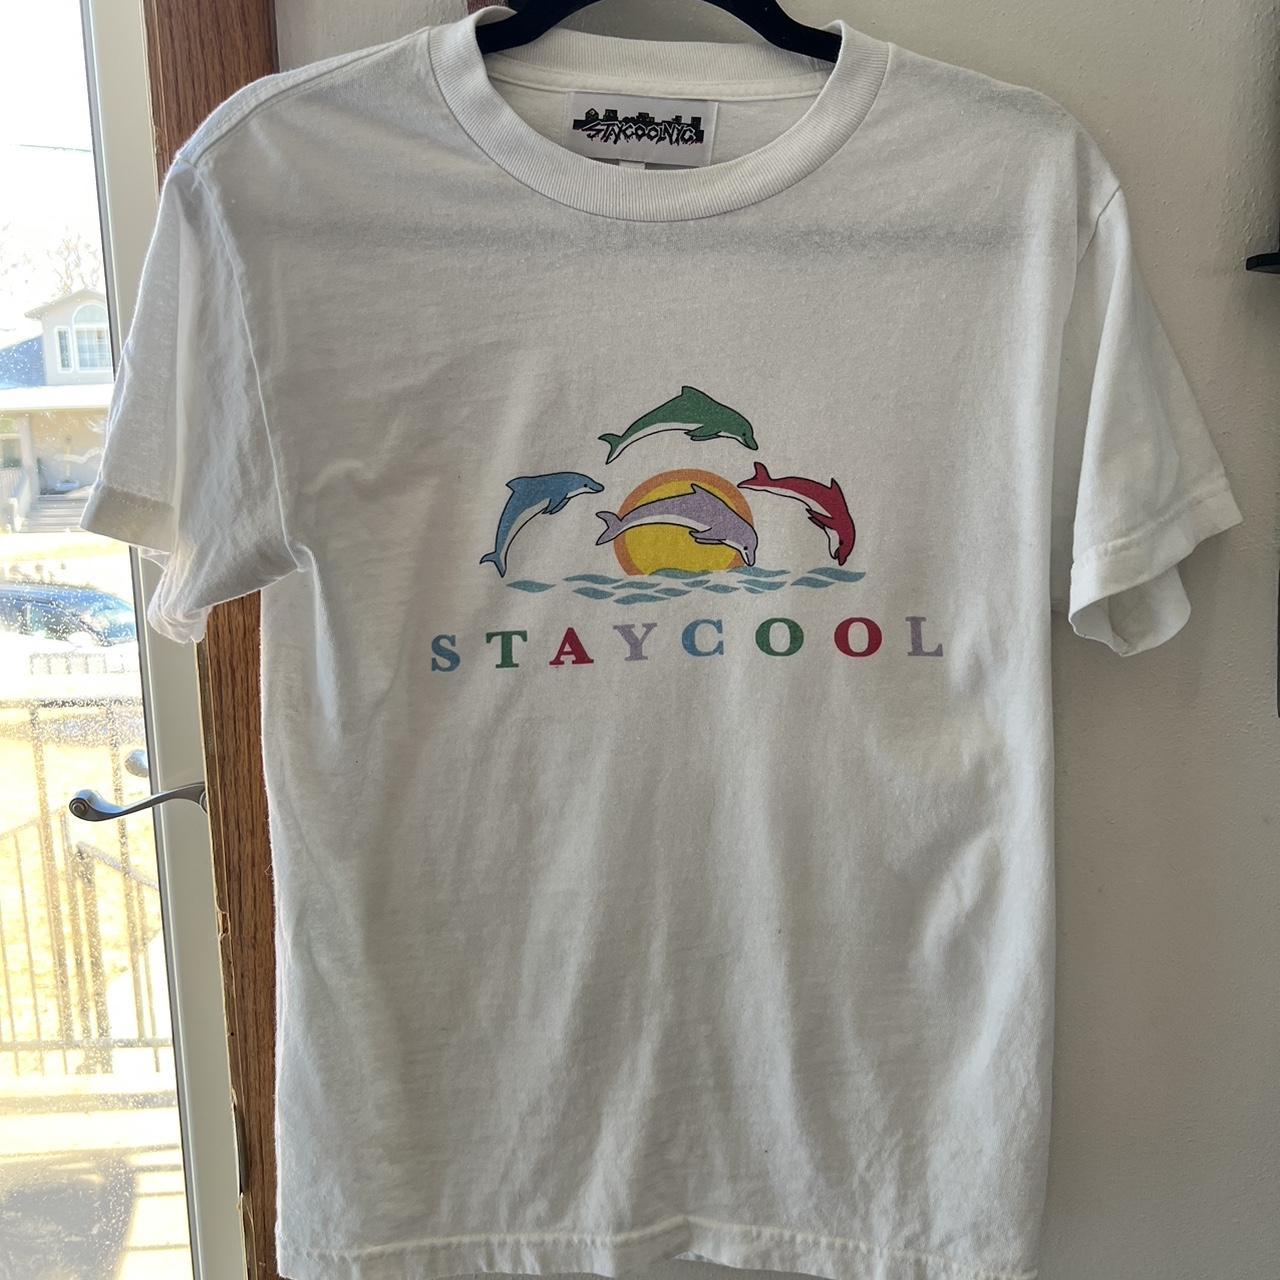 STAY COOL NYC Men's White T-shirt